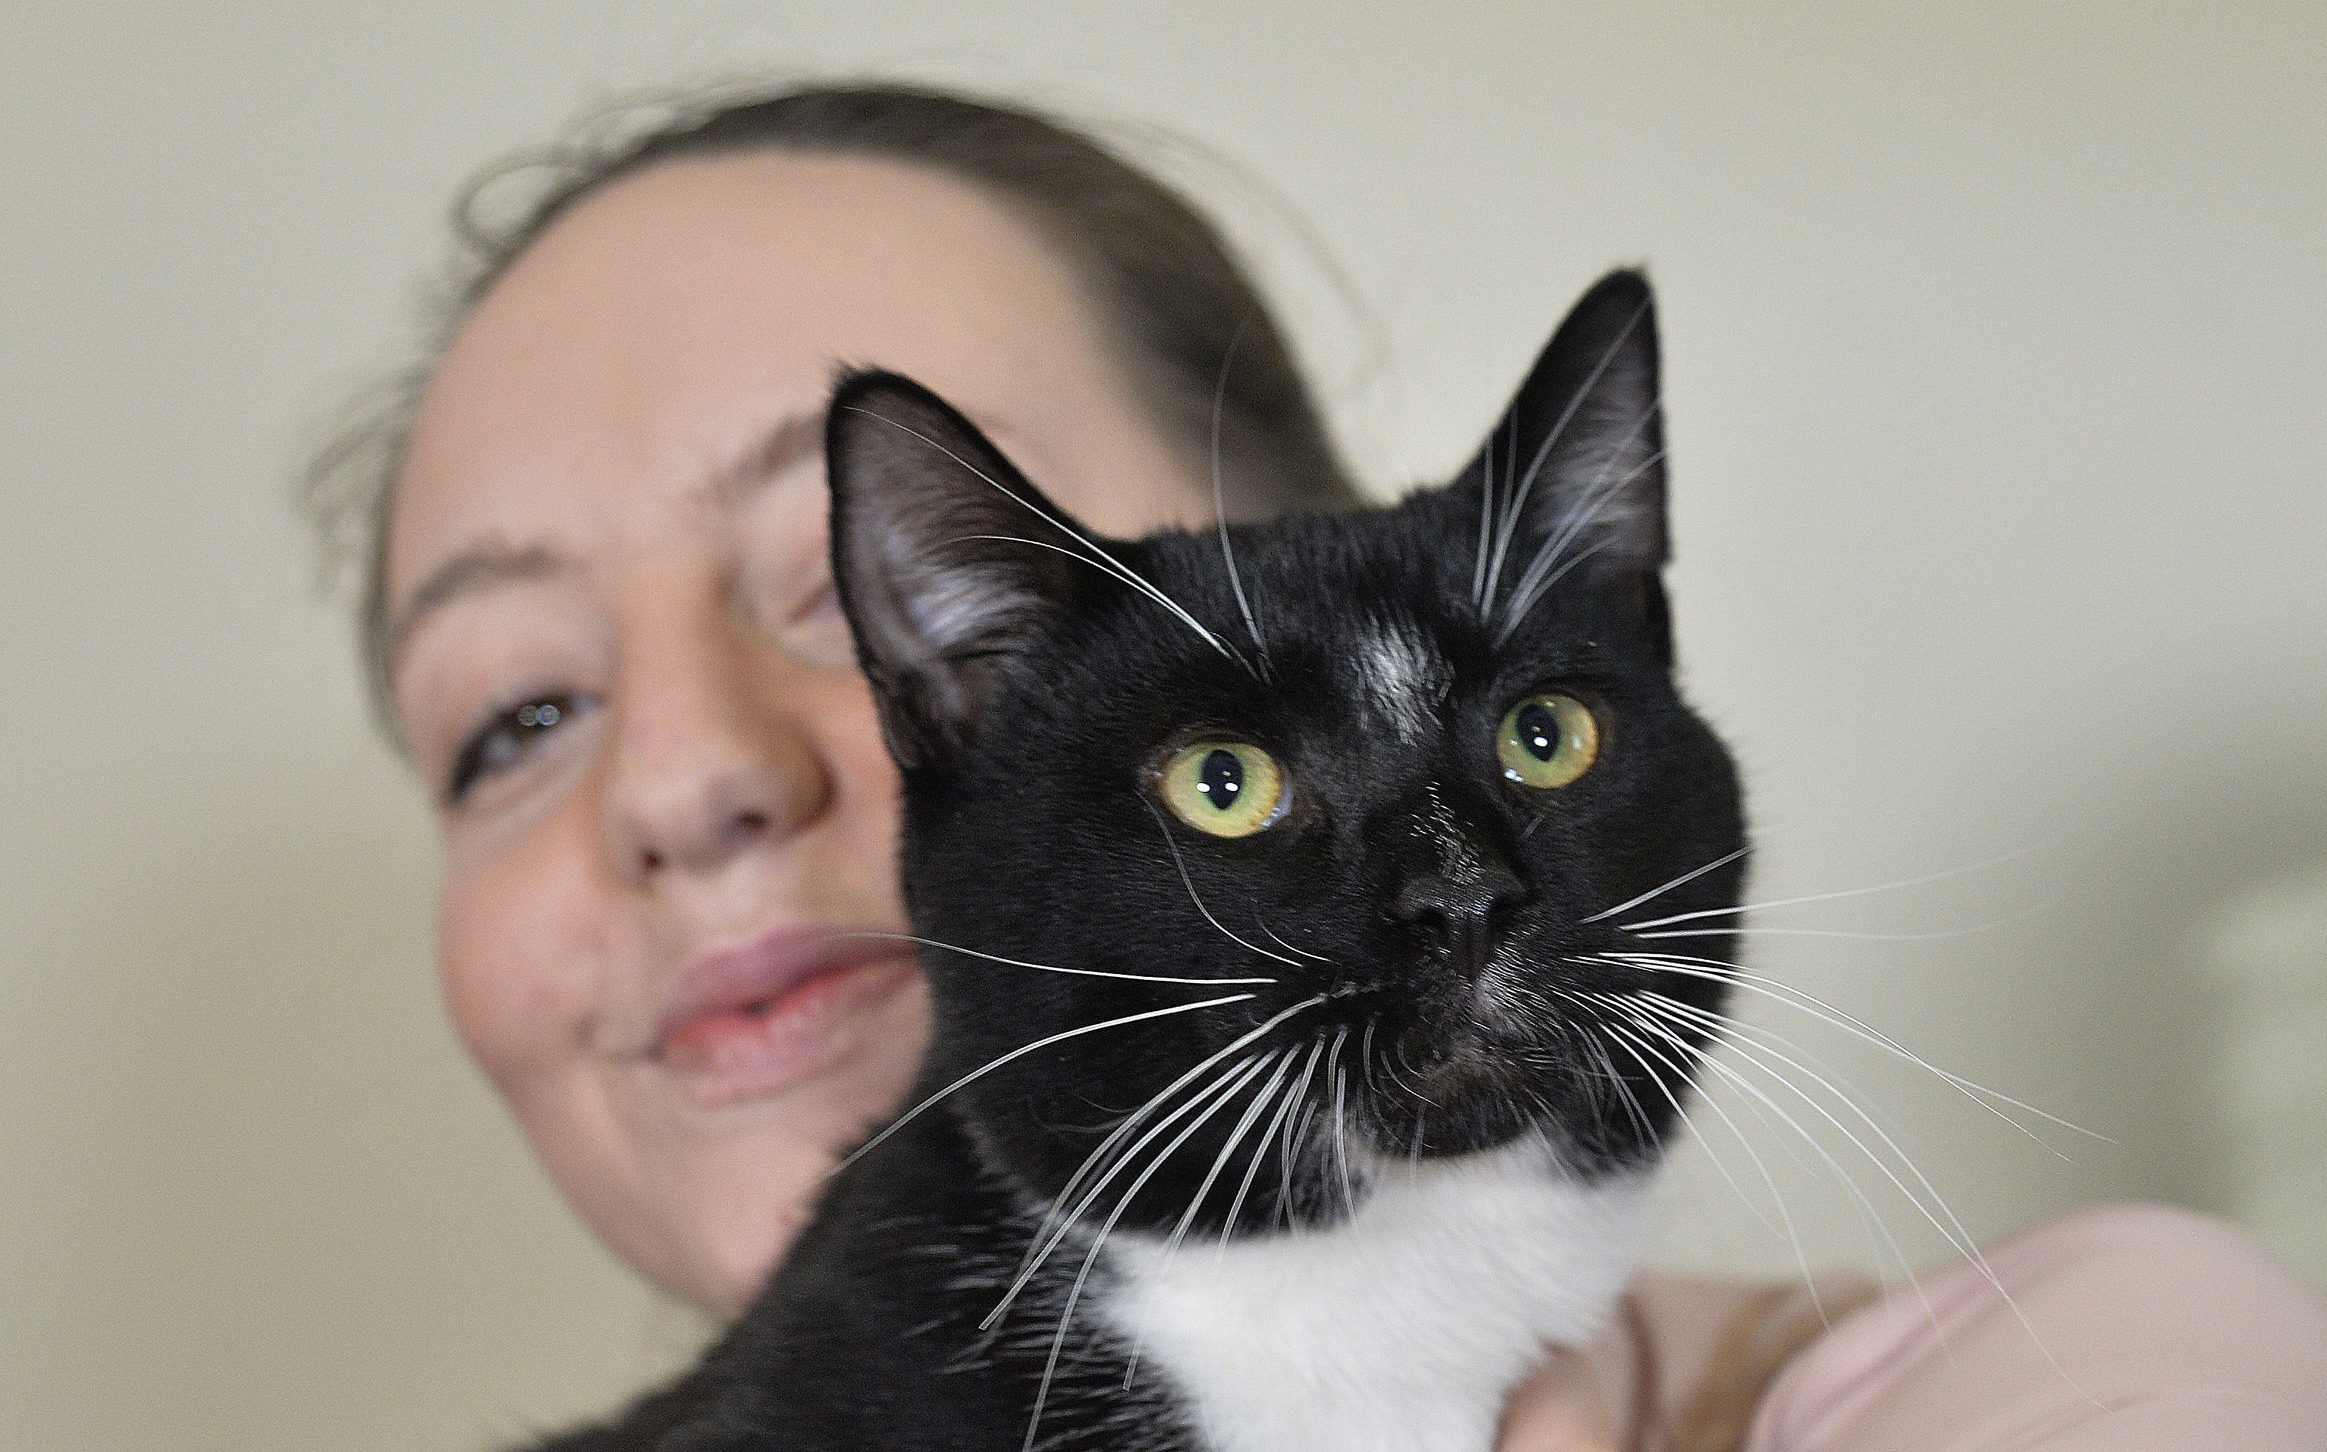 Woody the cat, with owner Stephanie Wood